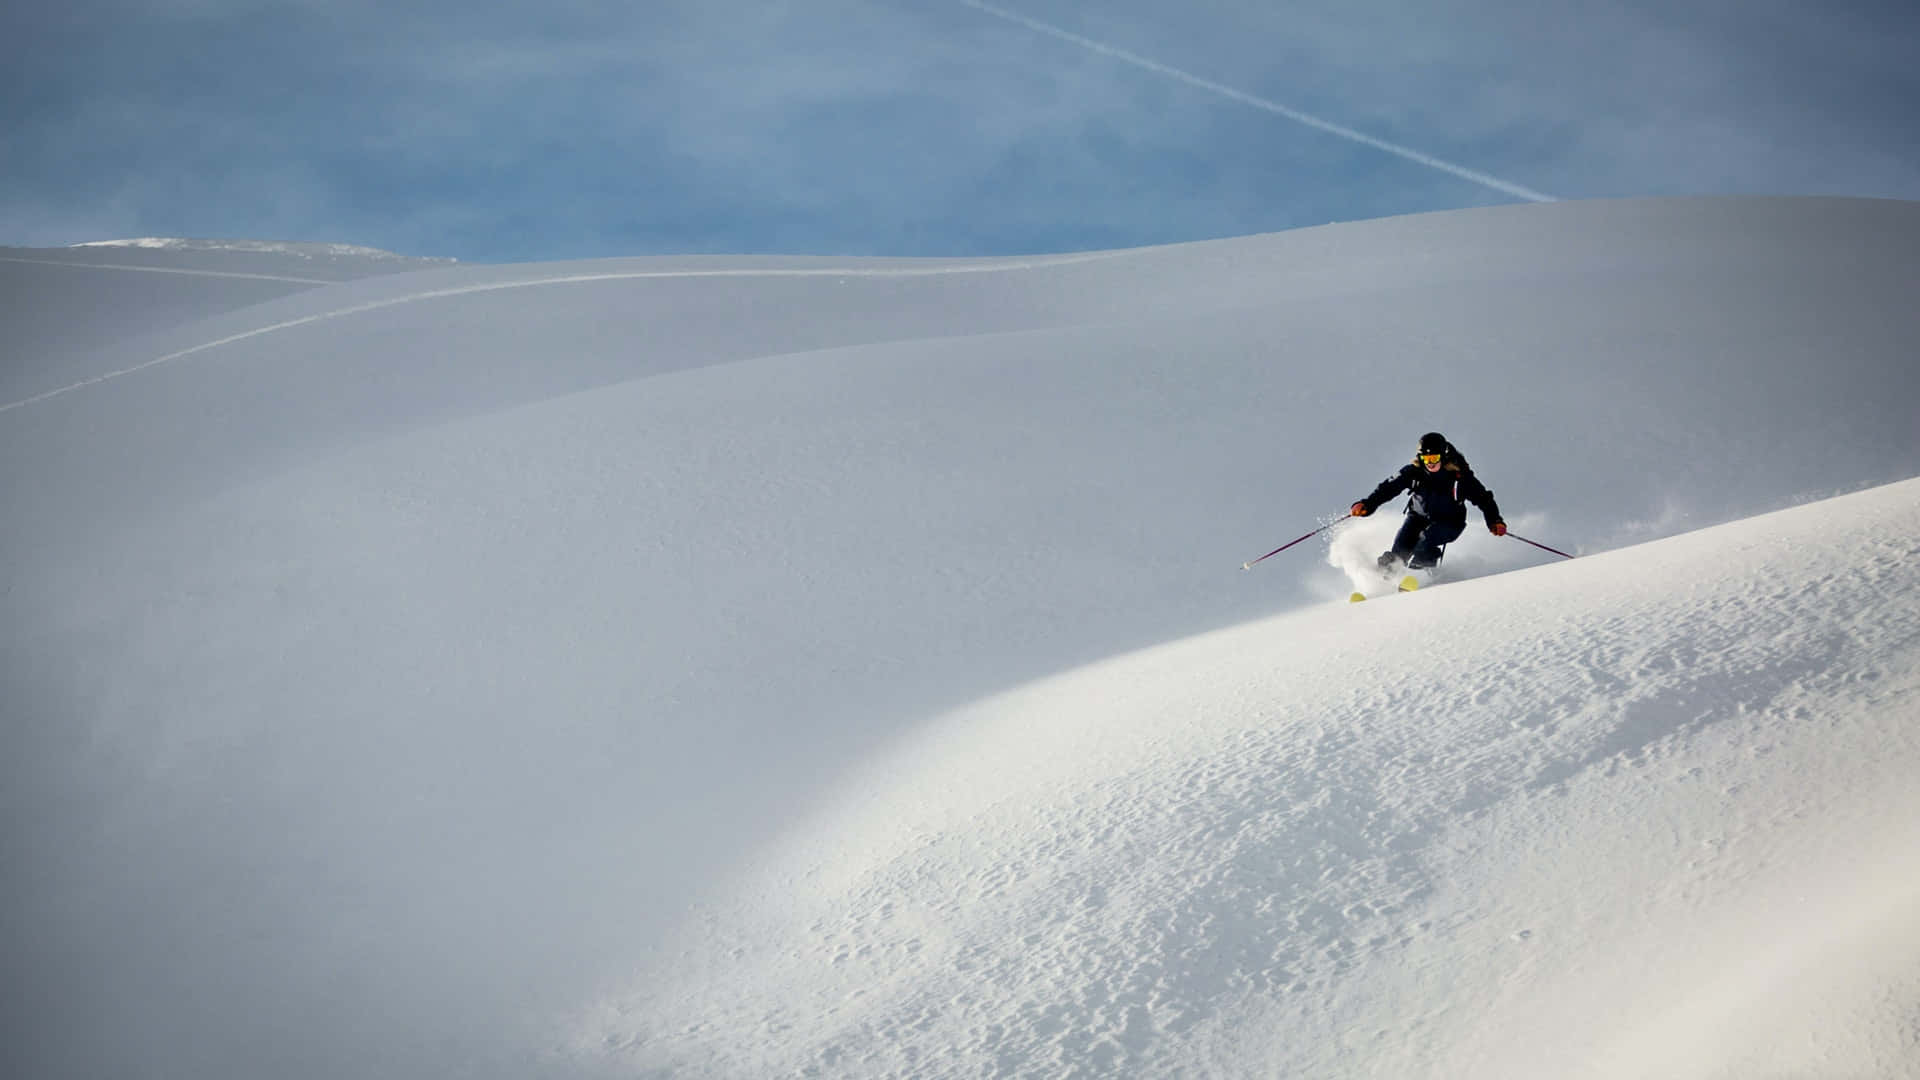 Carve up the slopes with your skis Wallpaper